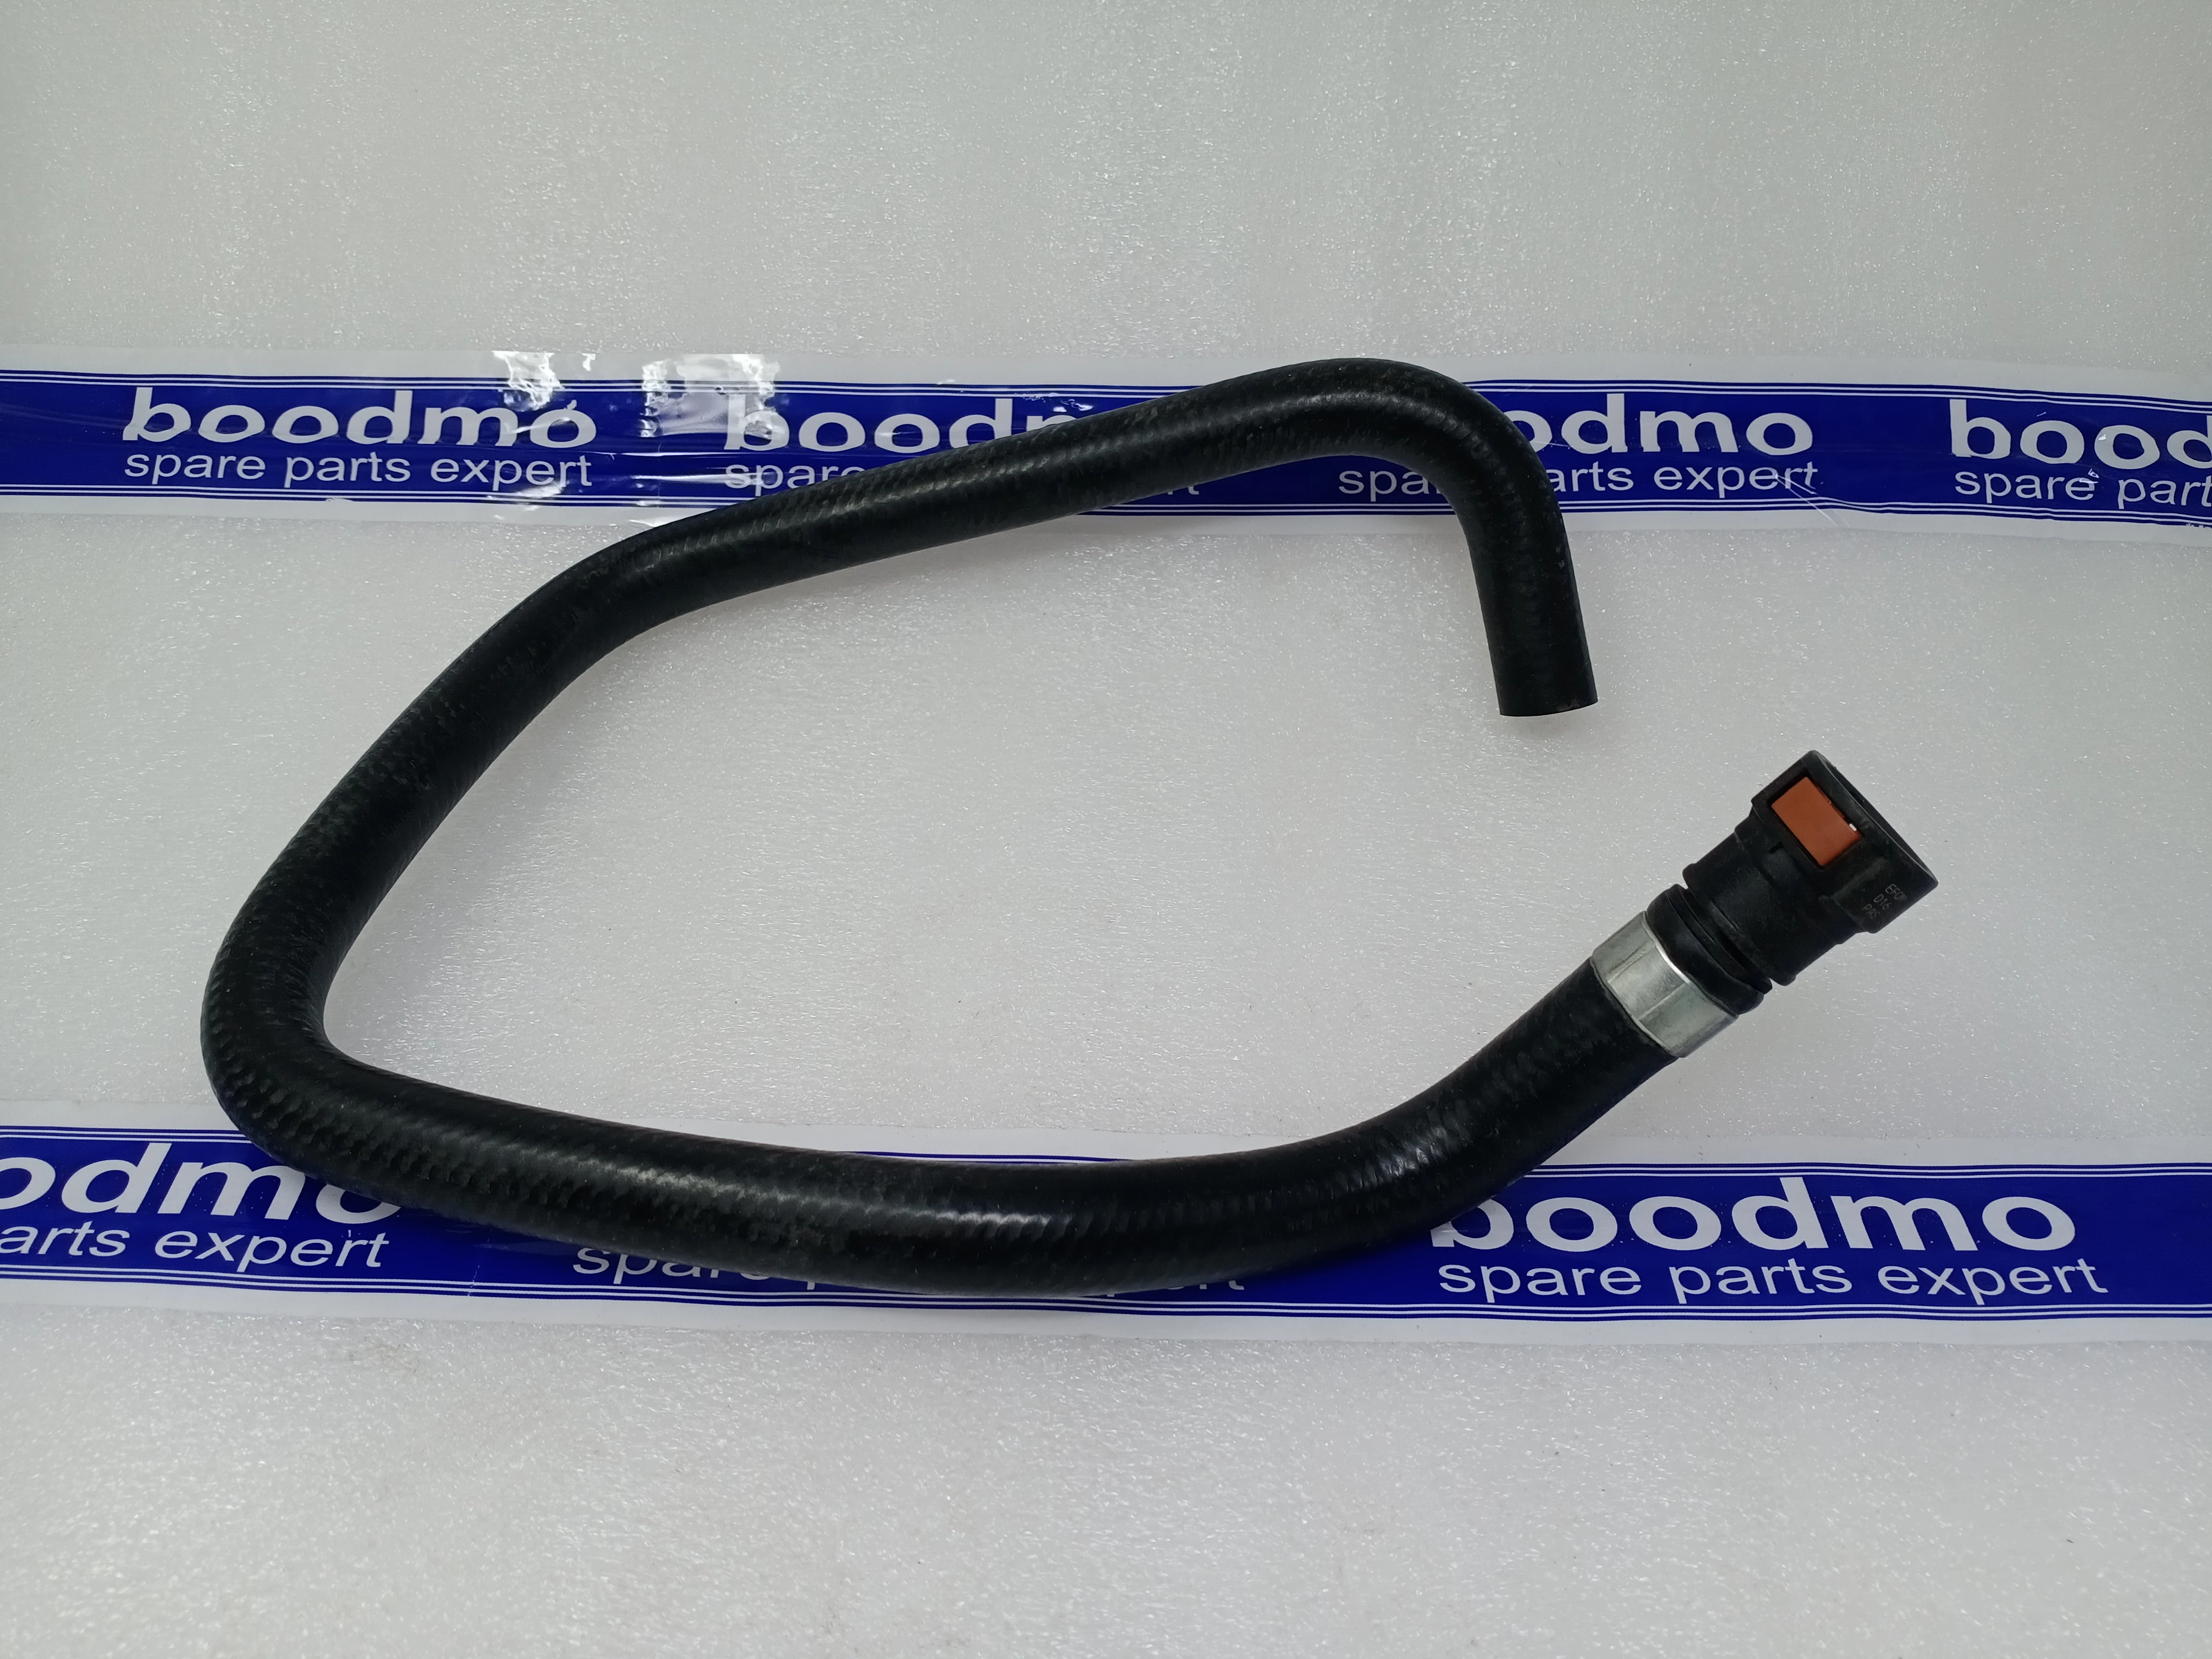 ASSY SUCTION HOSE WITH QFC: TATA 286800106 -compatibility, features,  prices. boodmo